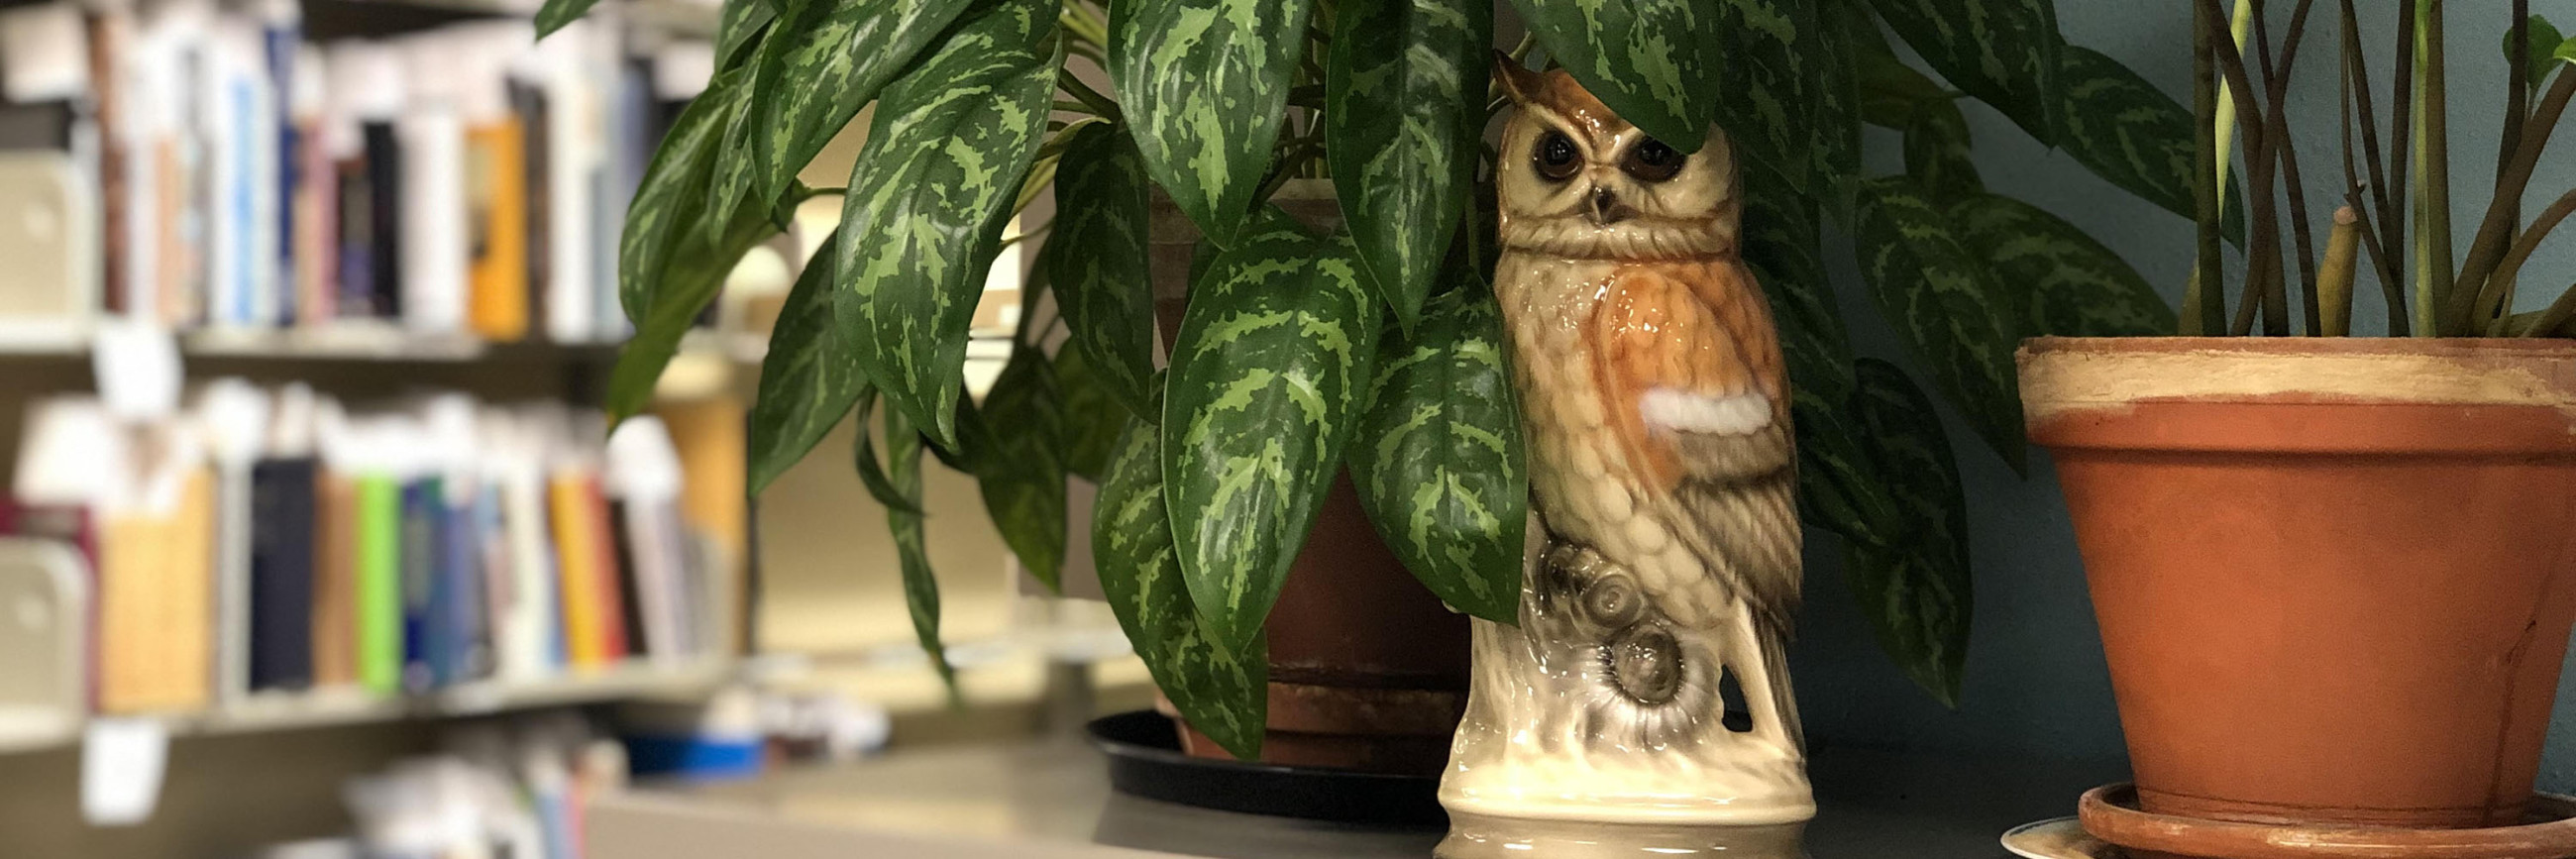 Ceramic owl in the Technical Services offices